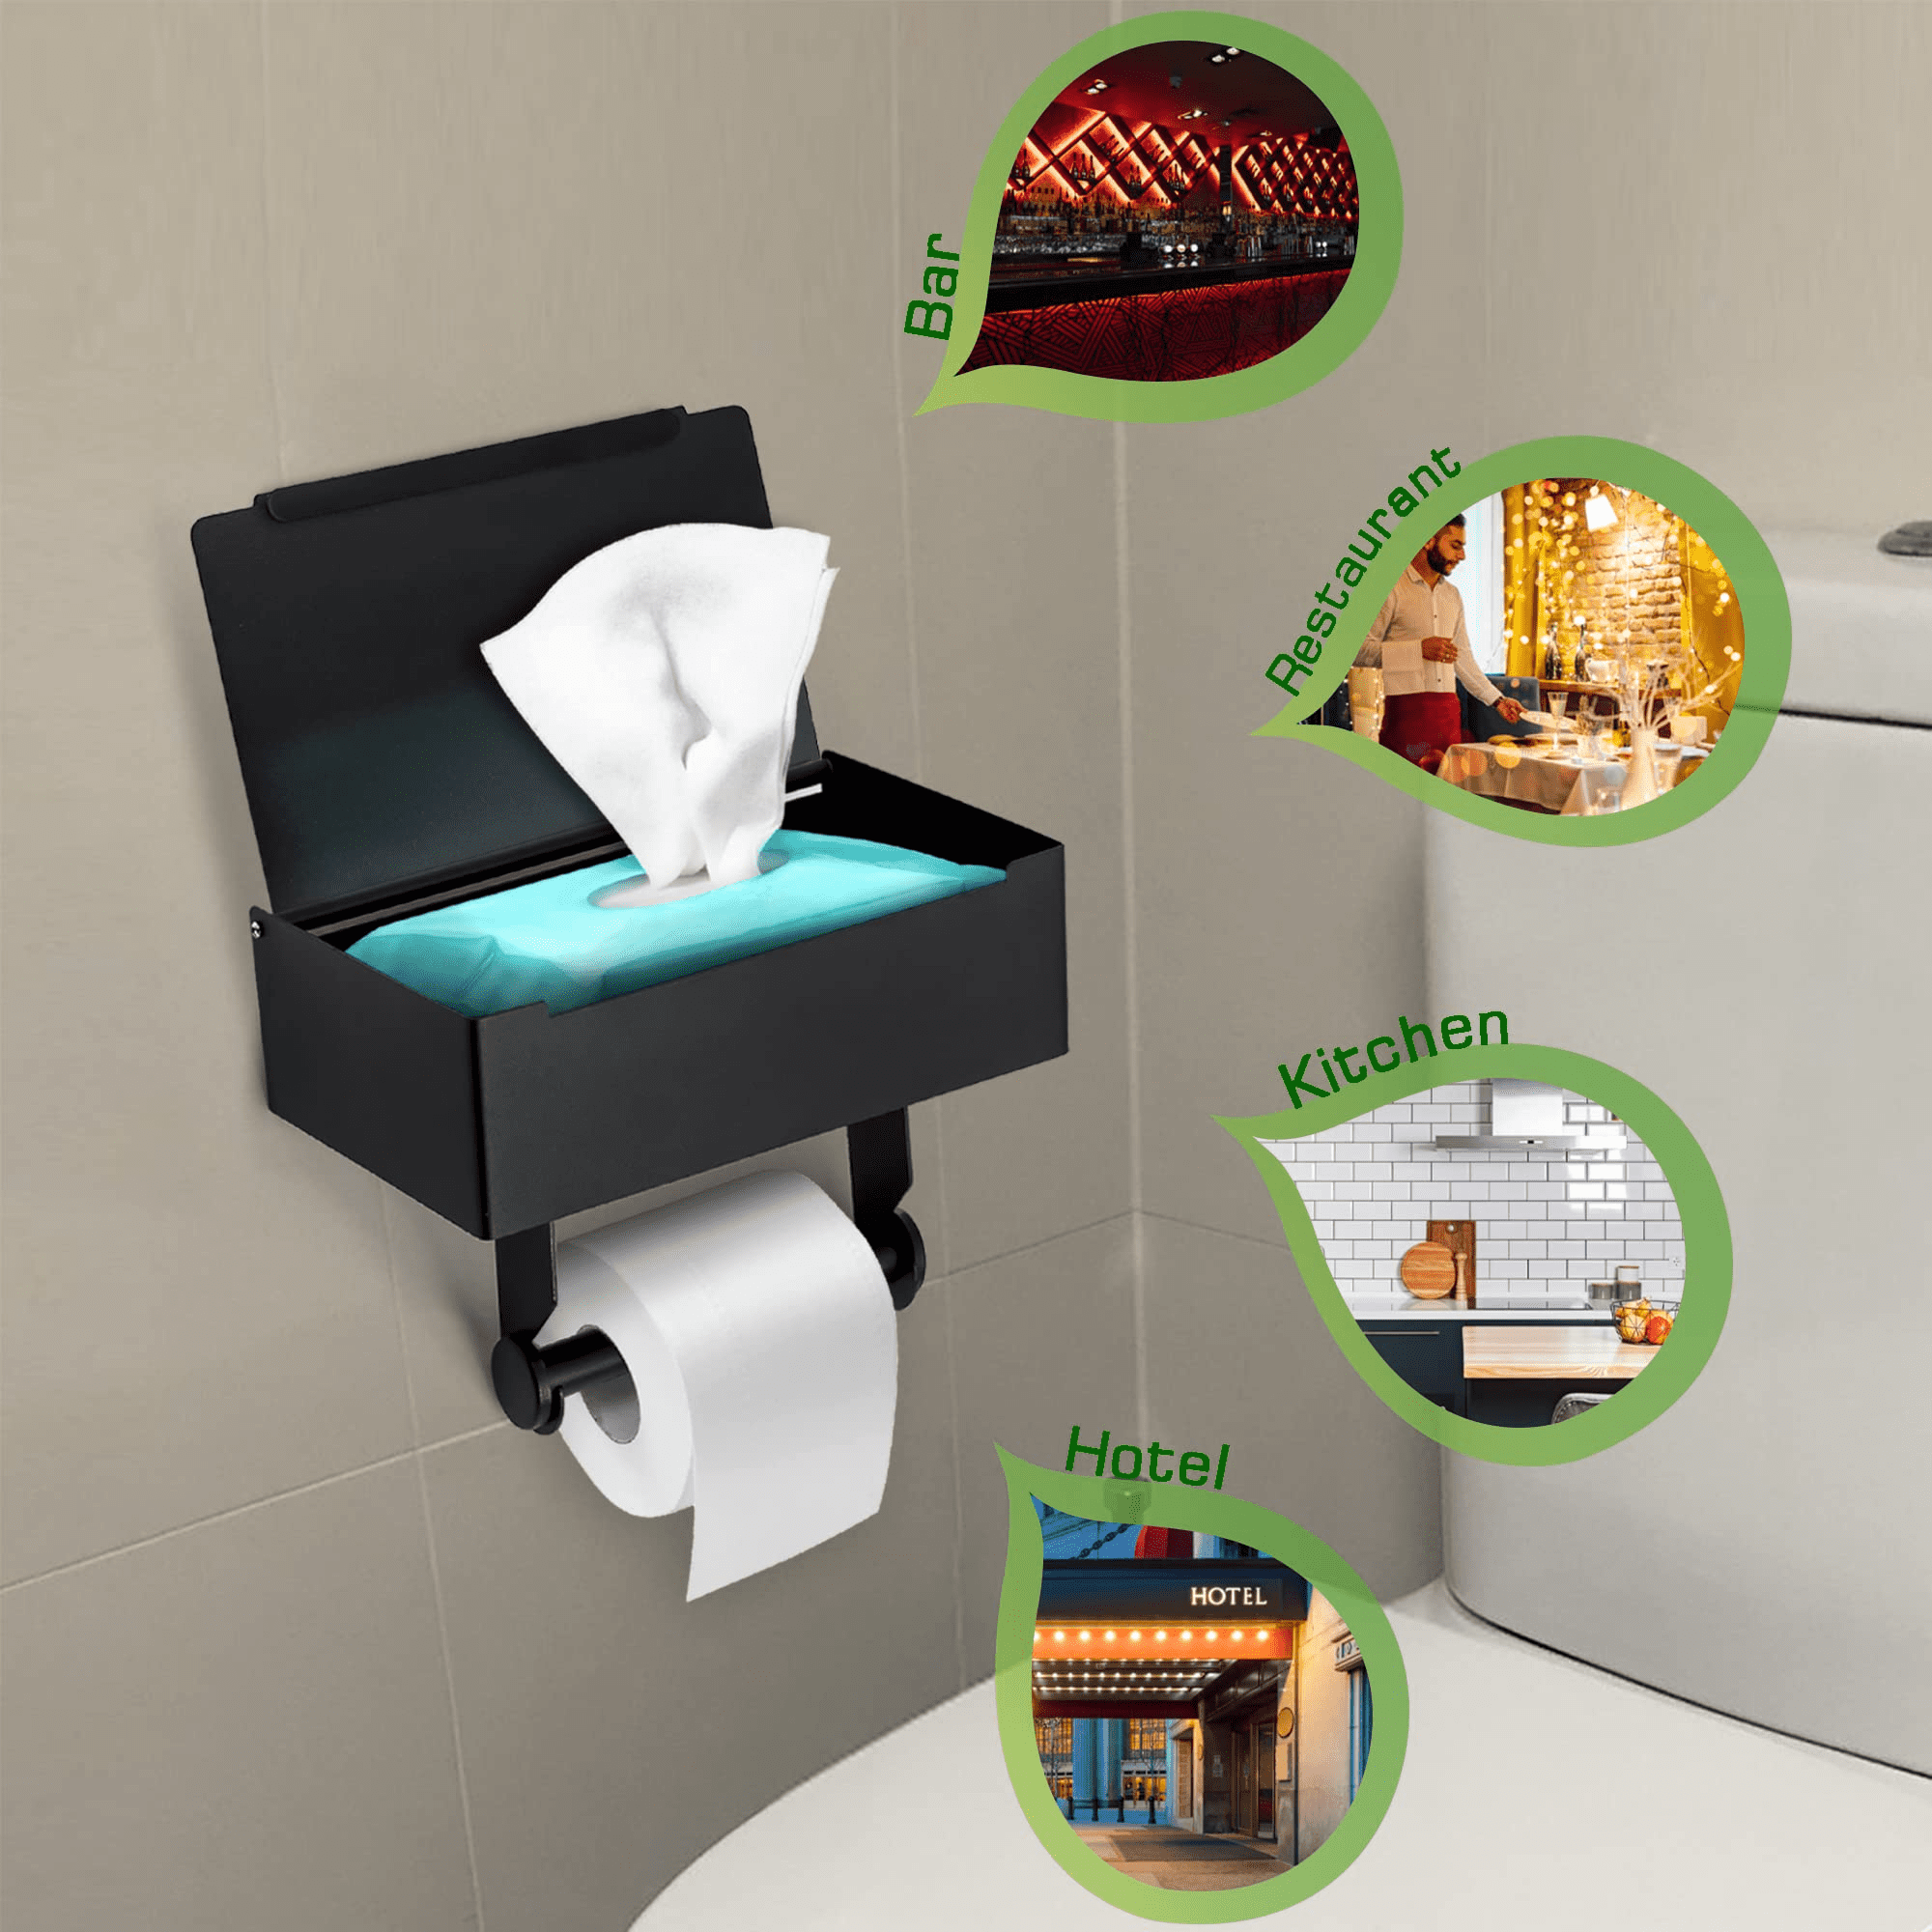 Gpoty Wall-mounted Toilet Paper Holder with Shelf,Black Toilet